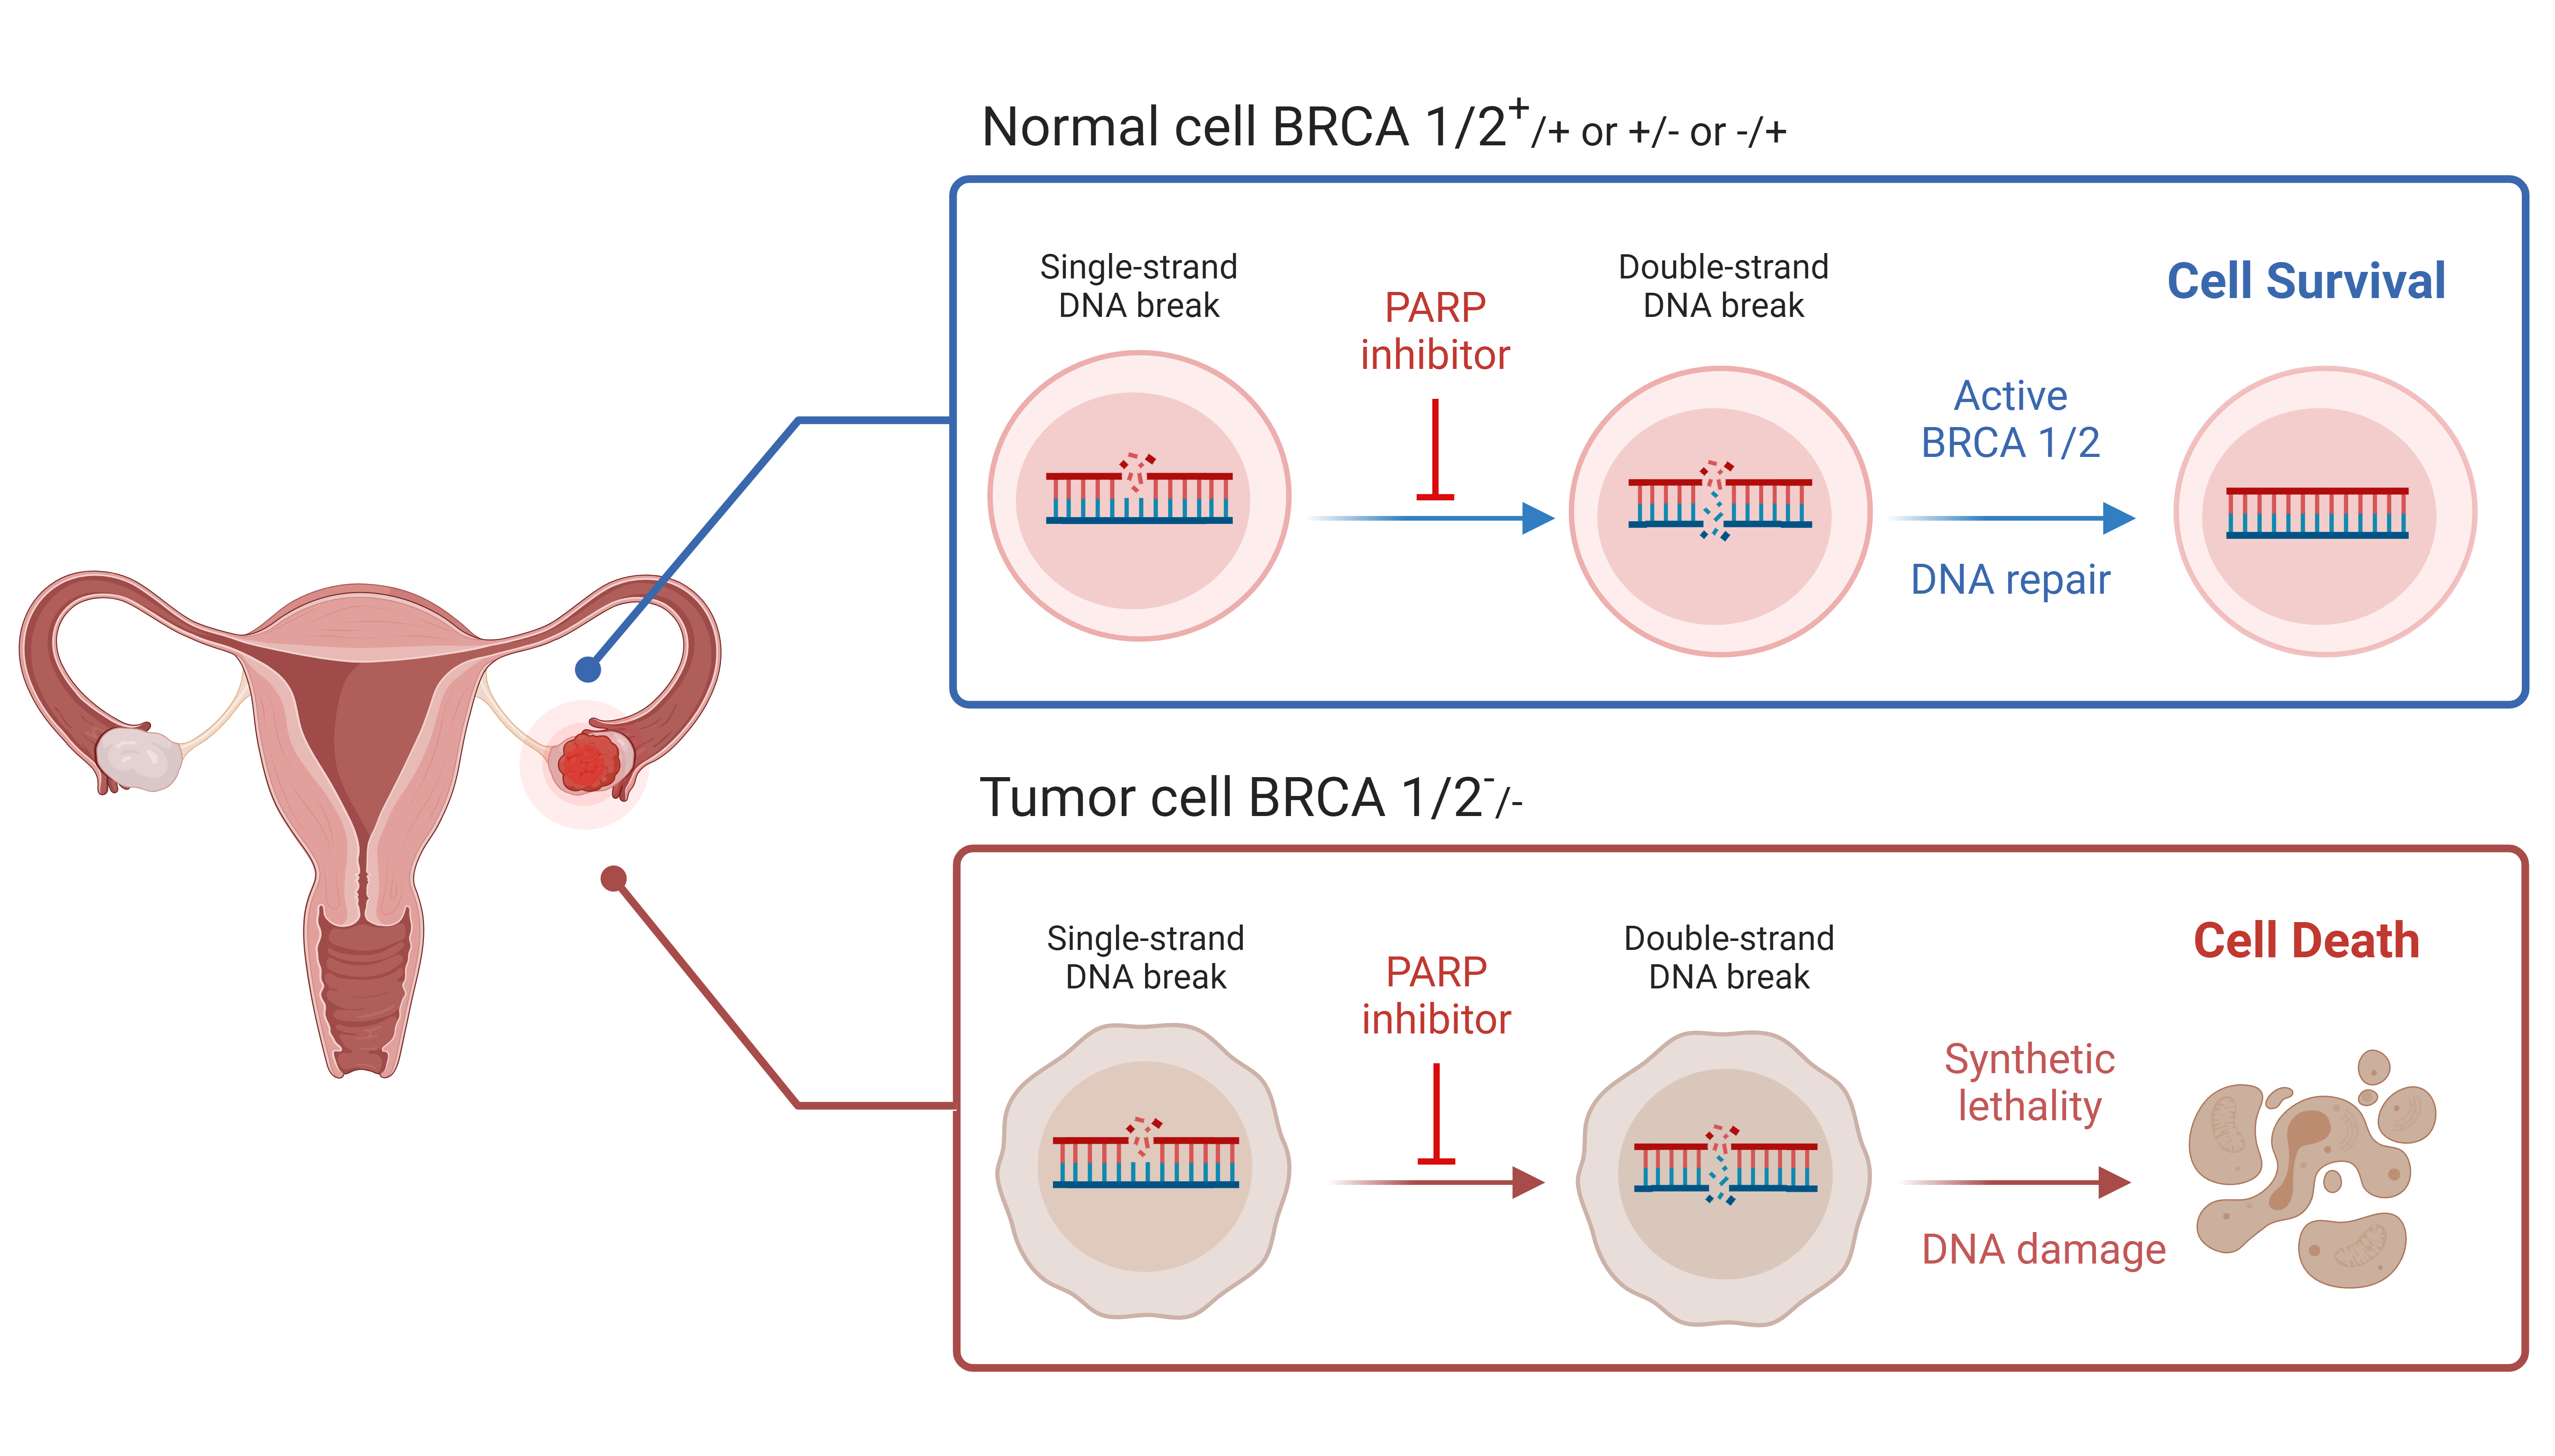 Mechanism of action of PARP inhibitors in BRCA-deficient cancer cells. Inhibition of PARP in addition to deficient homologous recombination repair leads to accumulation of a lethal burden of DNA damage. This is known as synthetic lethality. 